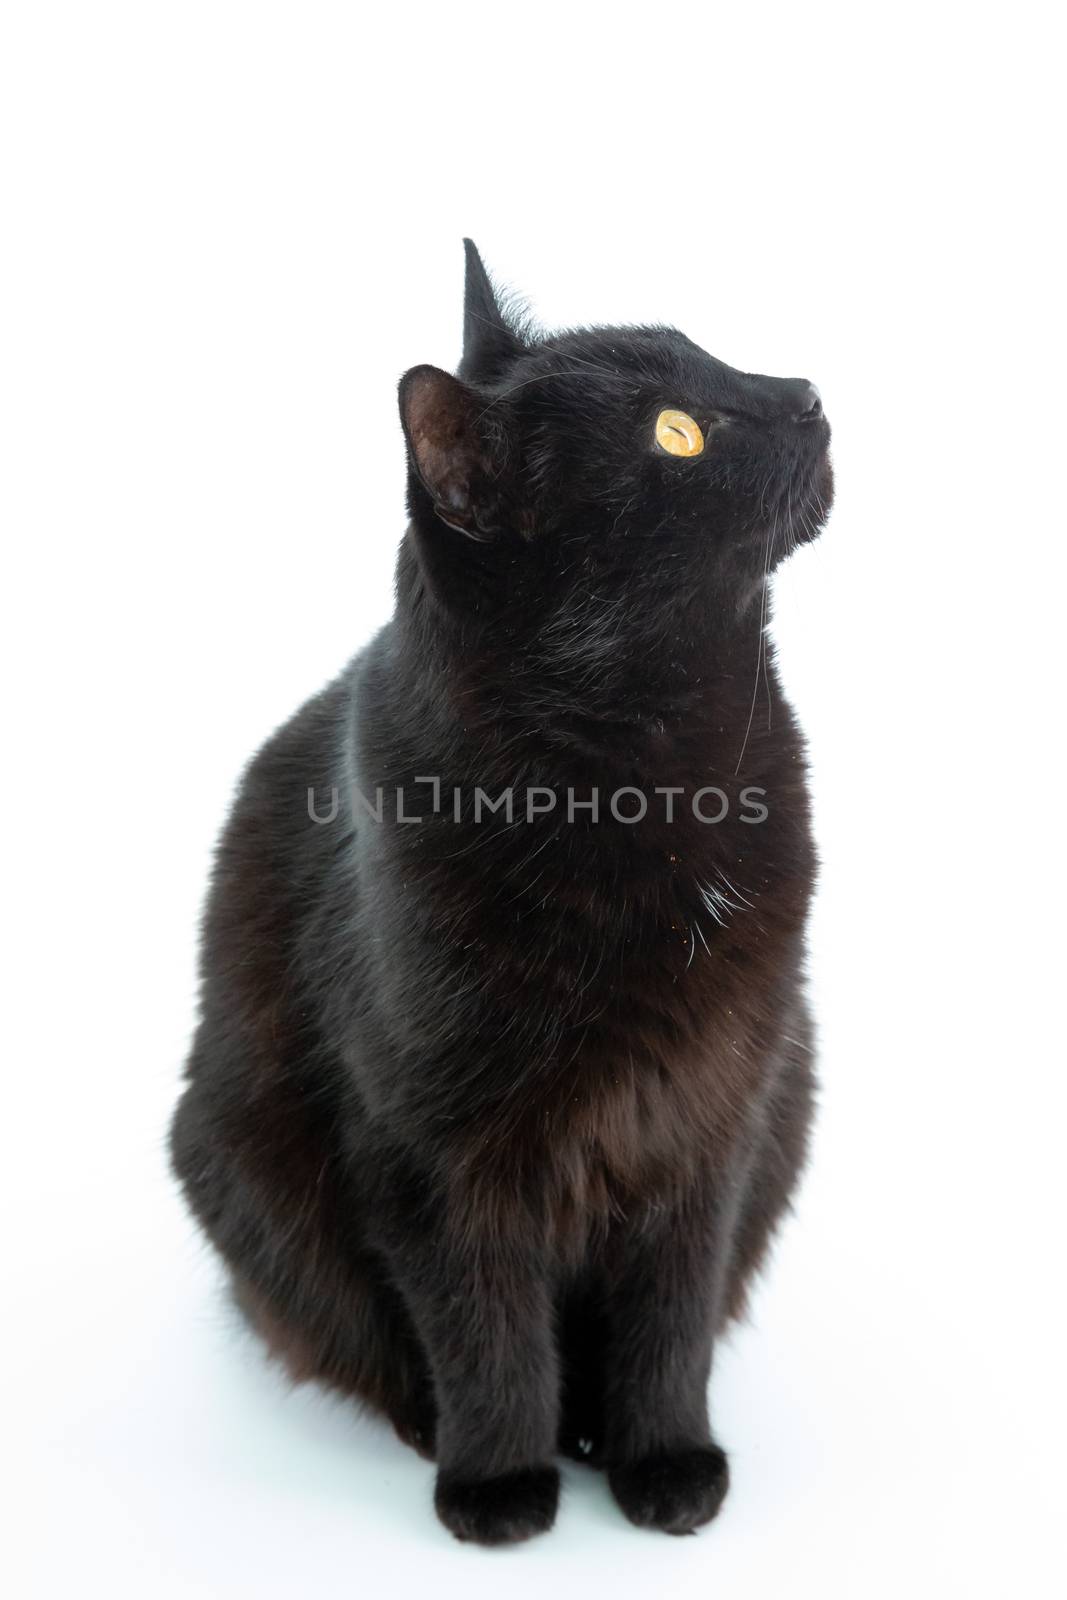 A beautiful black cat poses on a white background by 25ehaag6